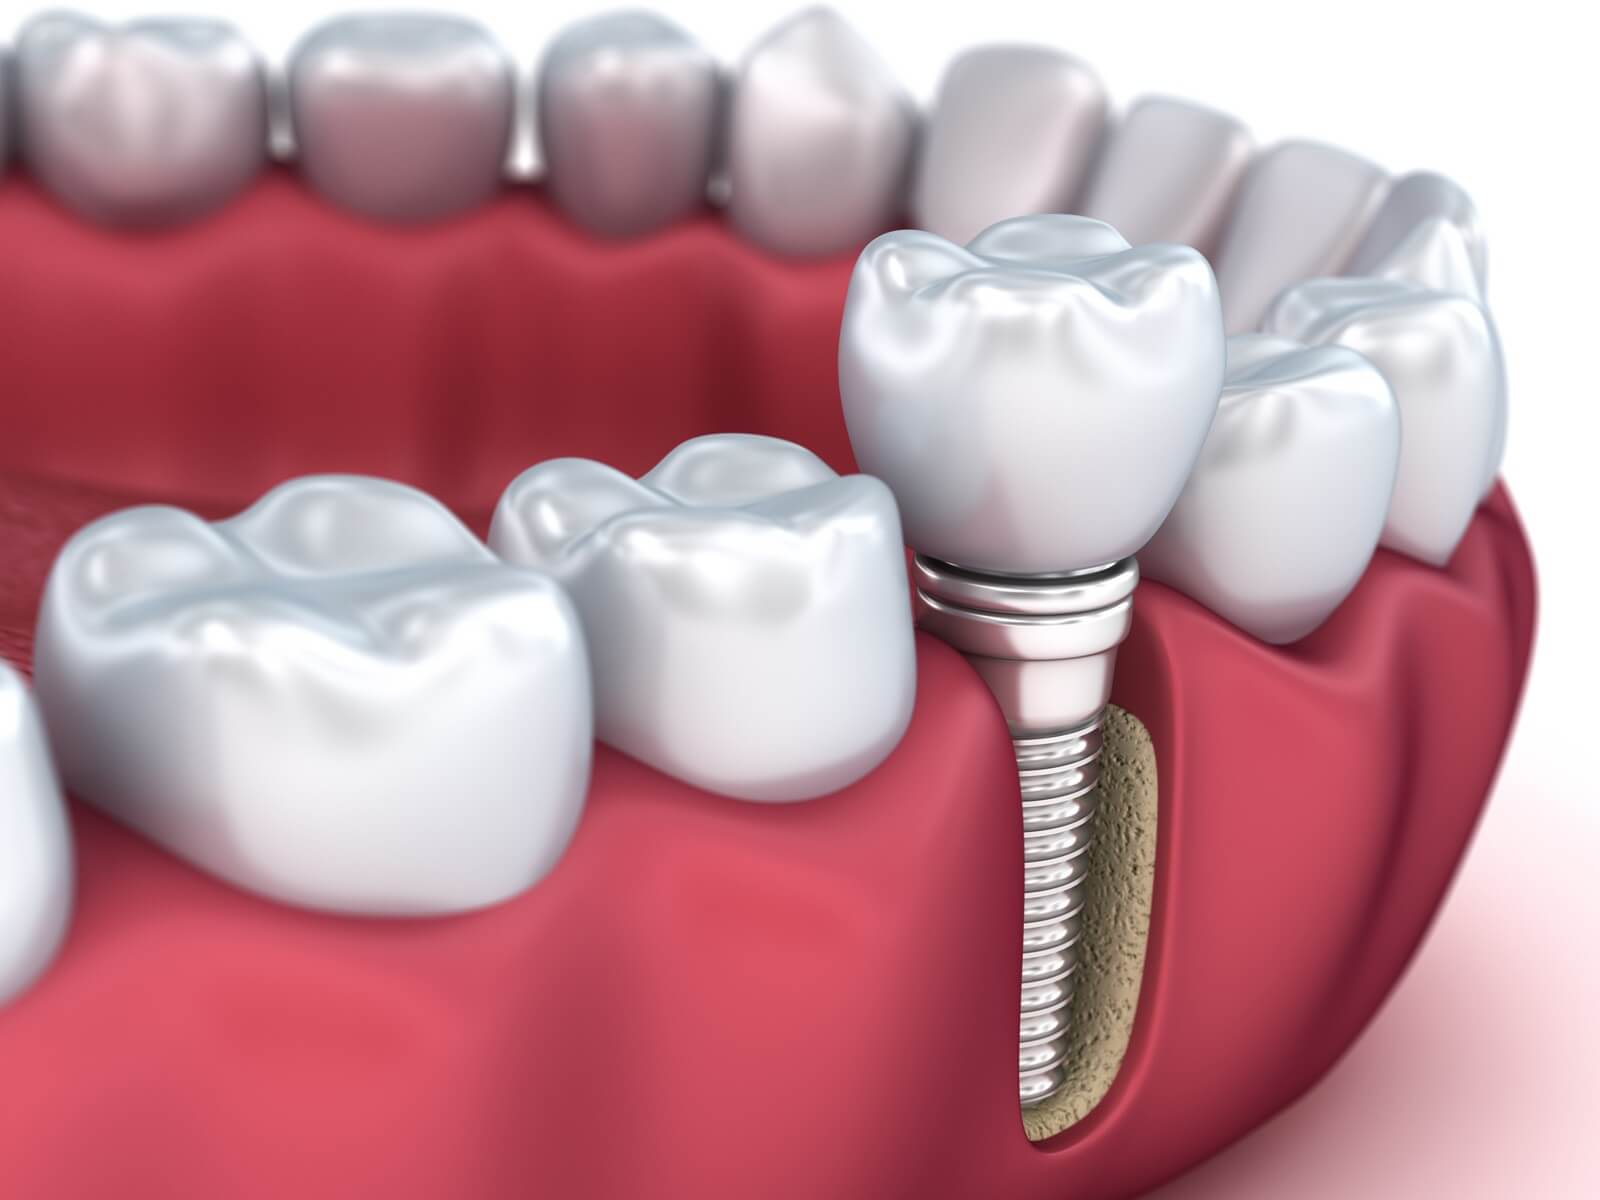 Options to Replace Missing Teeth